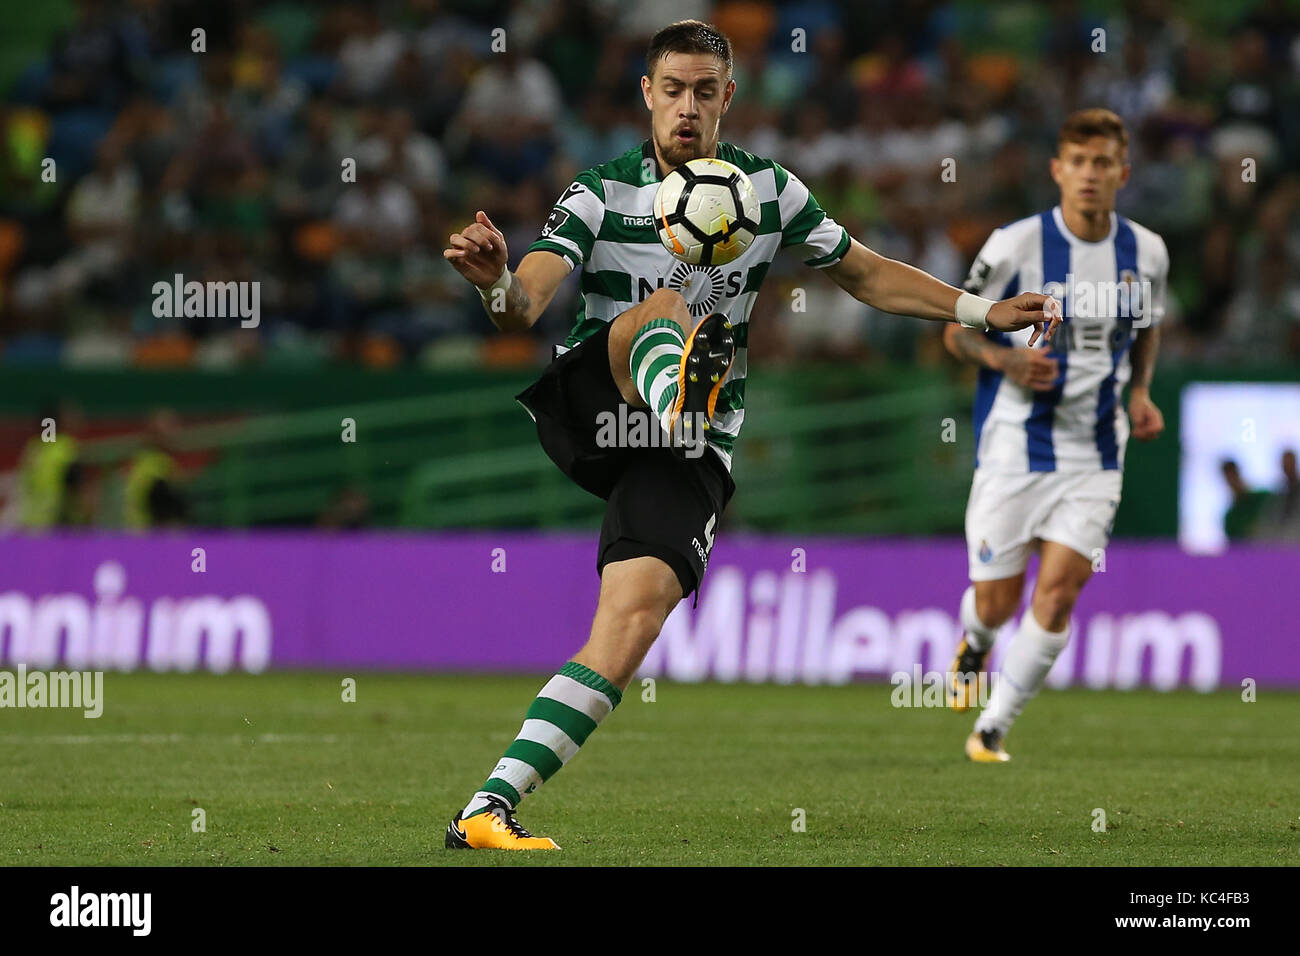 Lisbon, Portugal. 01st Oct, 2017. Sporting«s defender Sebastian Coates from Uruguay during Premier League 2017/18 match between Sporting CP and FC Porto, at Alvalade Stadium in Lisbon on October 1, 2017. (Photo by Bruno Barros / DPI) Credit: Bruno Barros/Alamy Live News Stock Photo